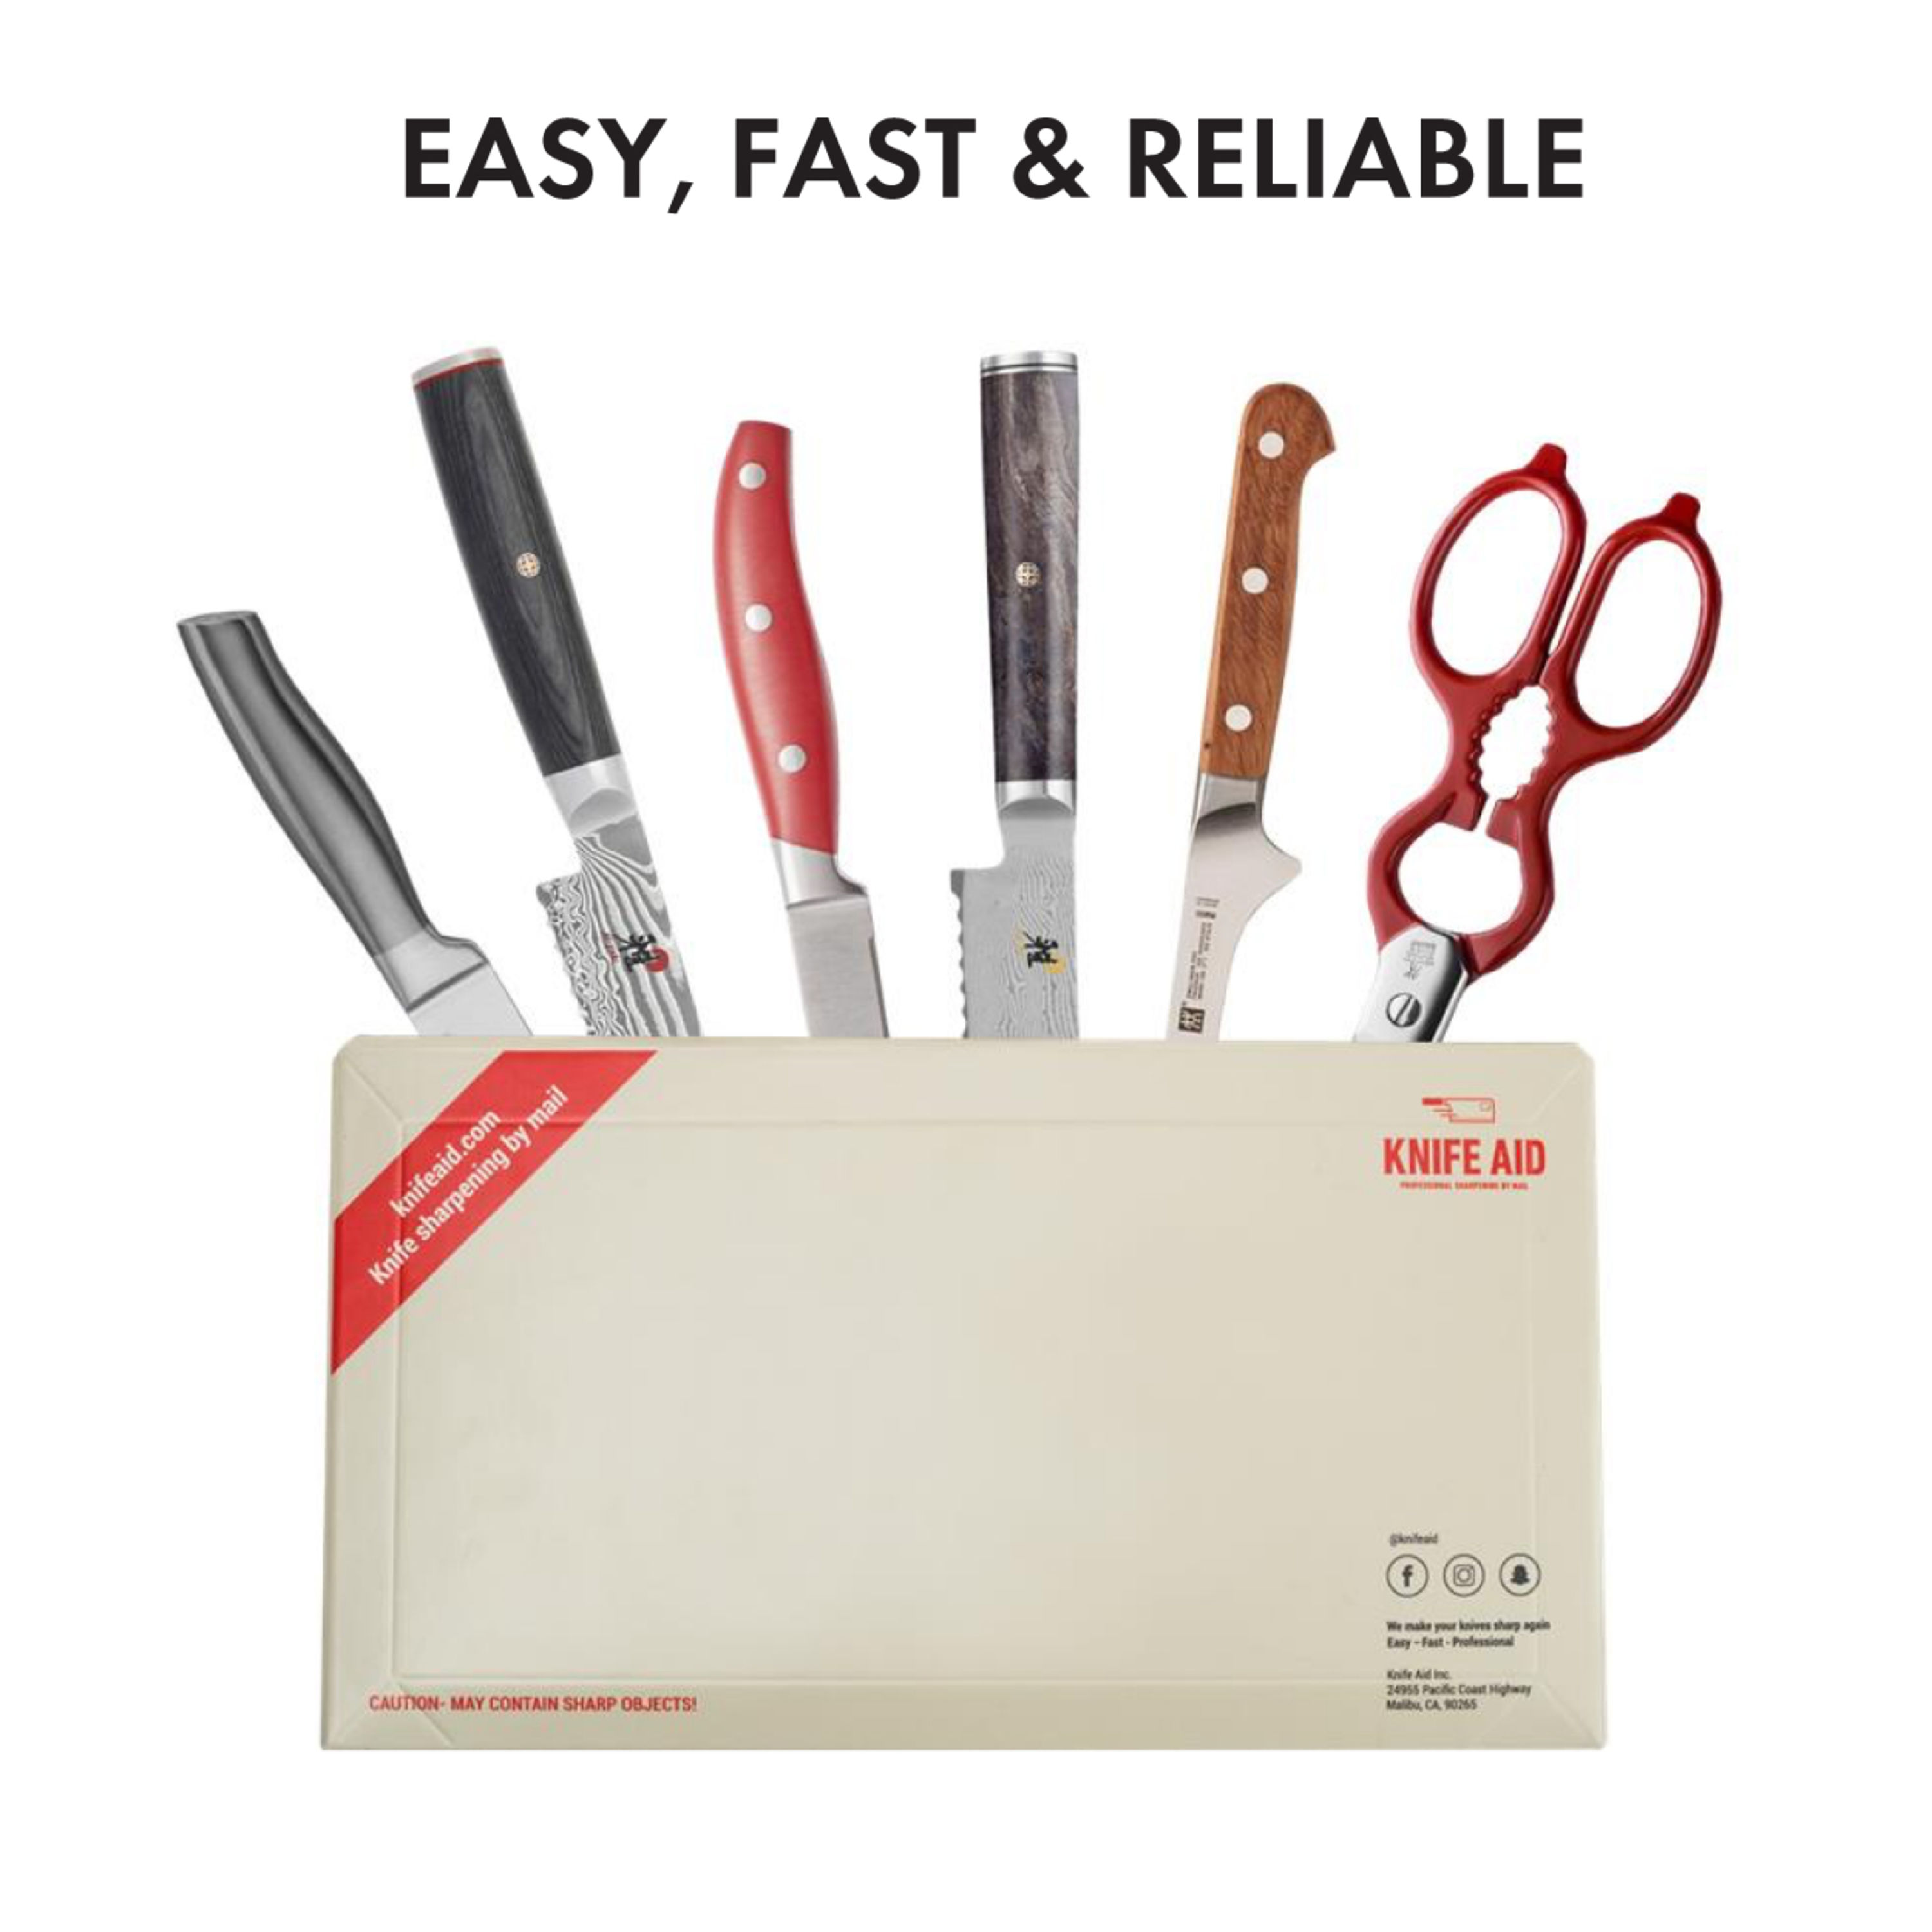 Hi everyone, how's this henckles self sharpening 20piece knife block? Its  on sale in coscto canada : r/chefknives